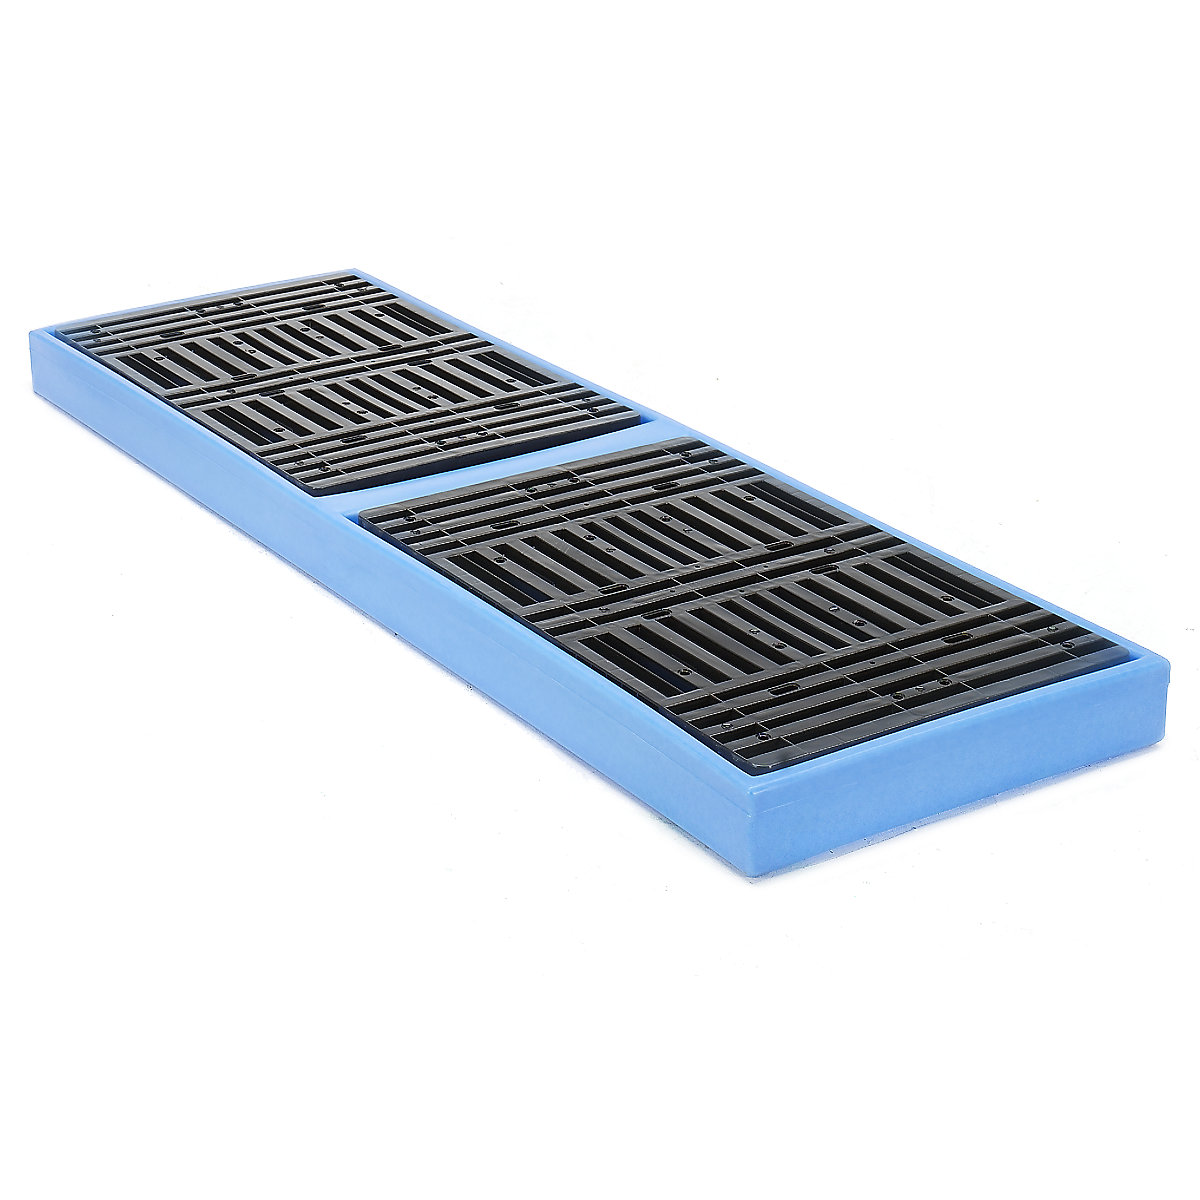 PE sump tray, LxWxH 2610 x 895 x 150 mm, sump capacity 300 l, with PE grate-3